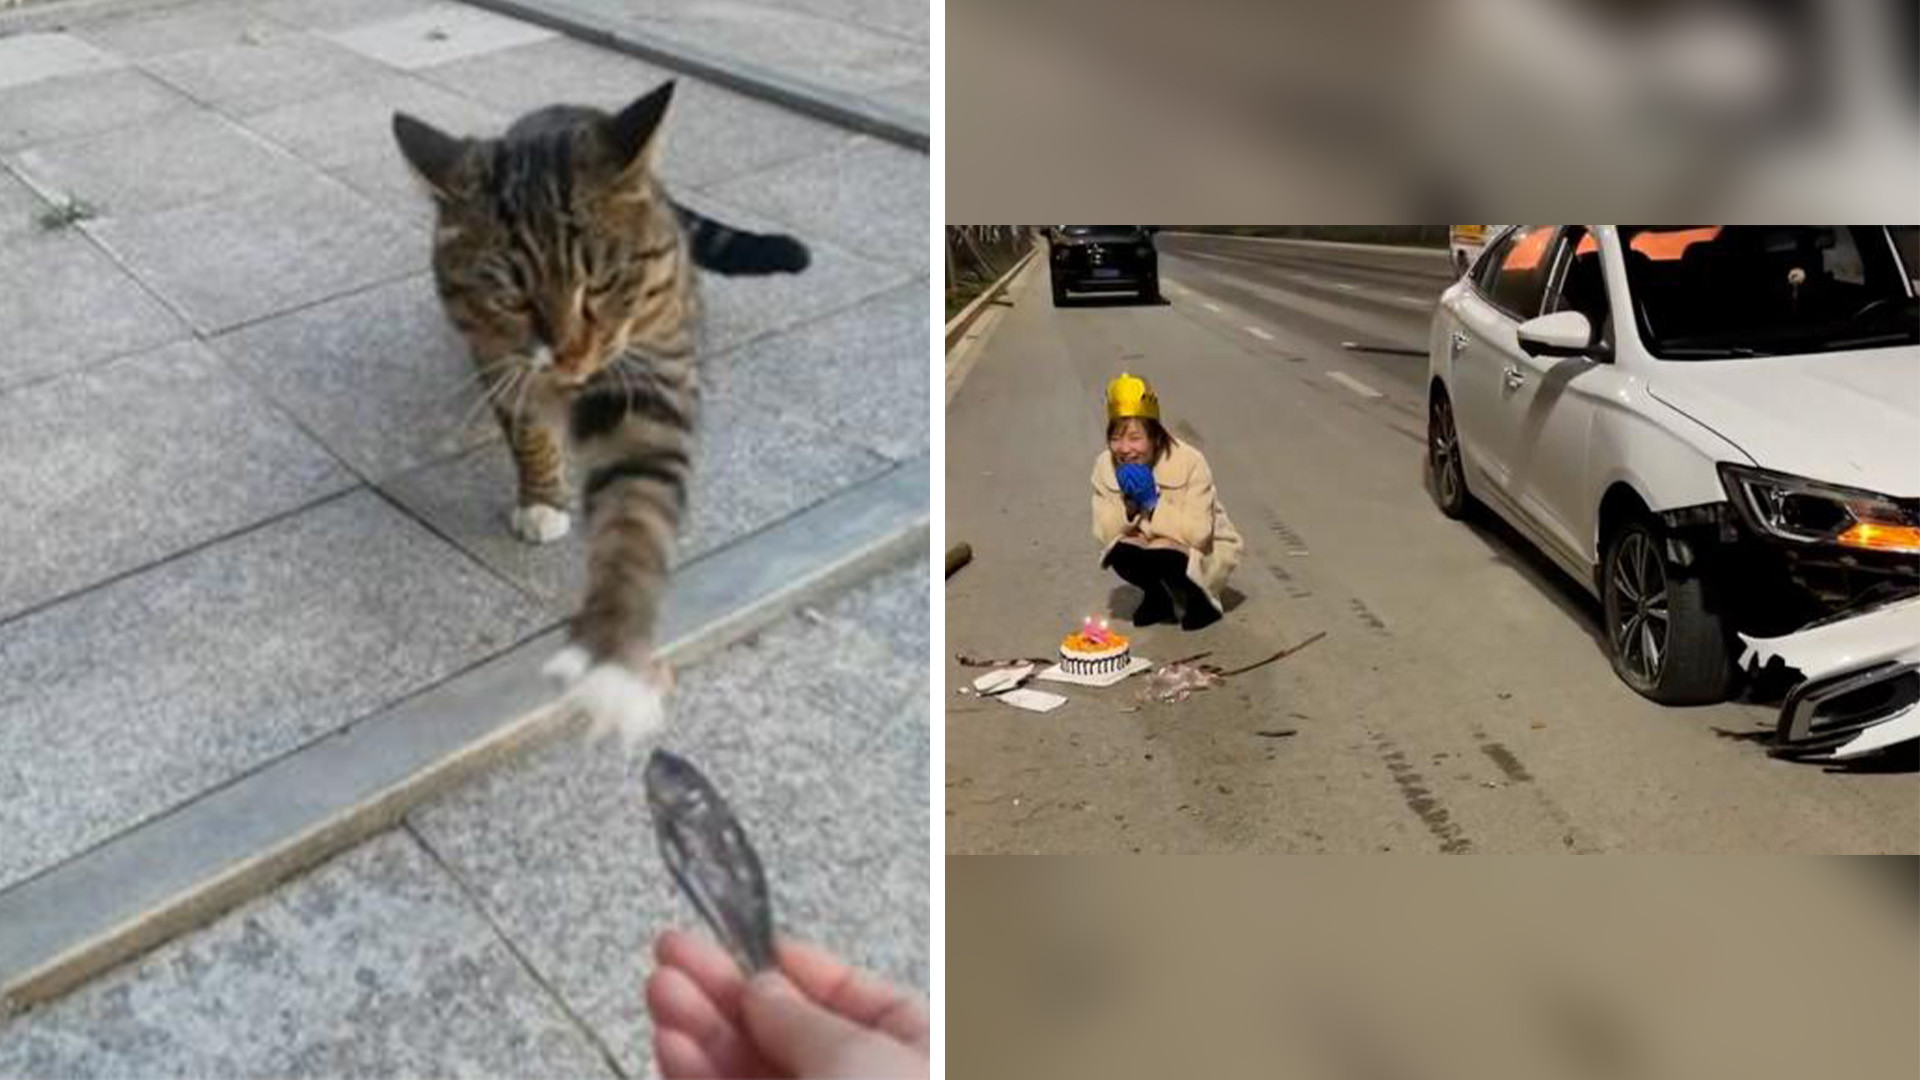 A kitten gives a woman a fish as a present and a couple celebrate a birthday on a roadside after being in an accident. Photo: SCMP: composite